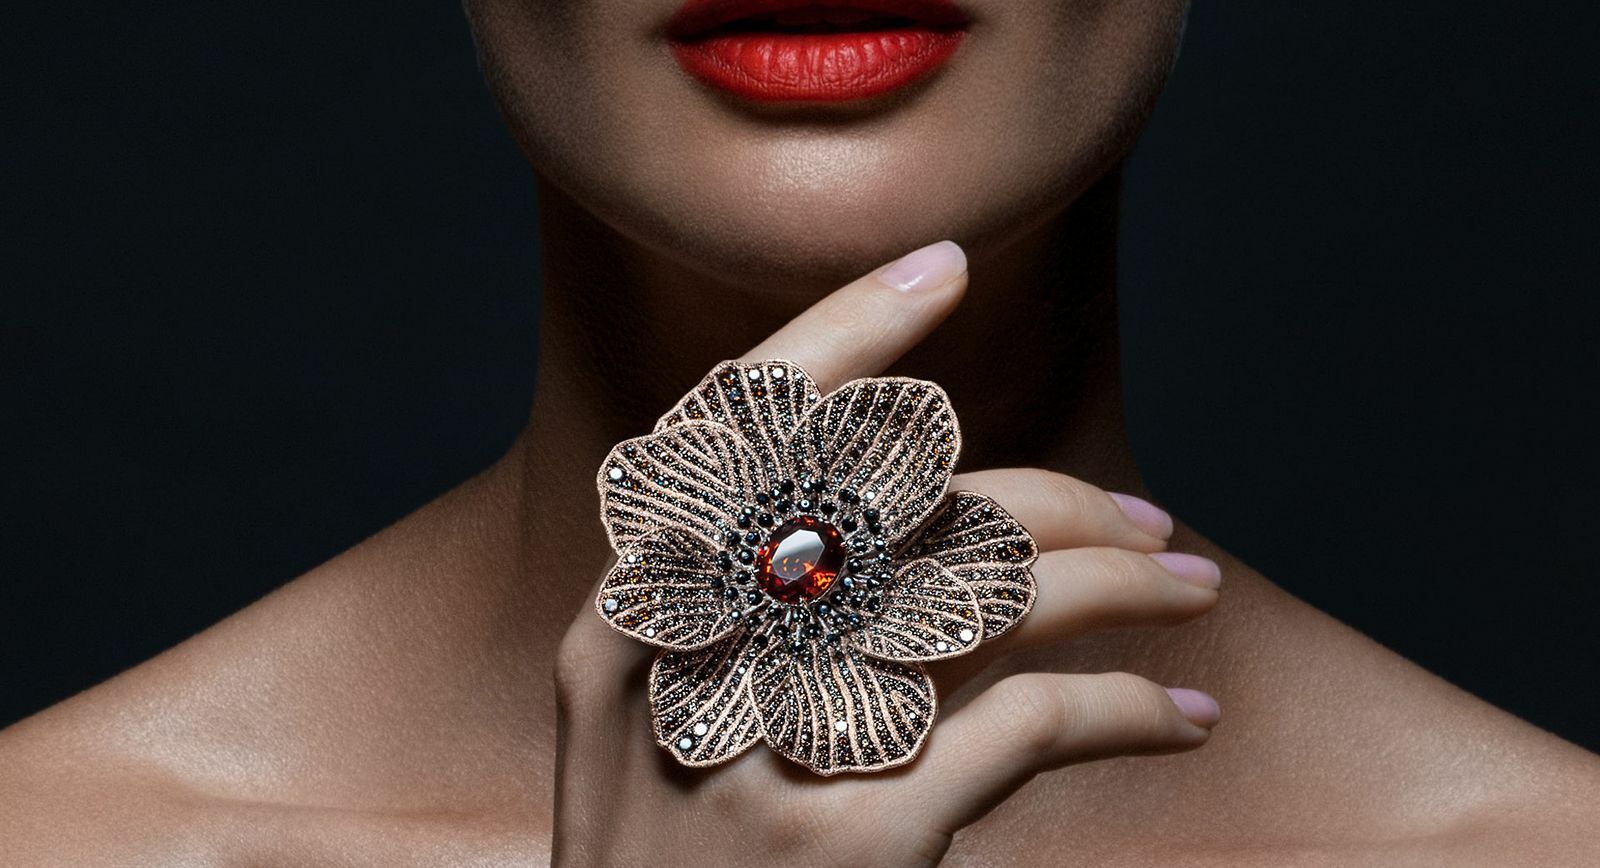 Alex Soldier: The Beauty Of My Jewellery Lies In Merging Fine Ornaments With Miniature Sculpture